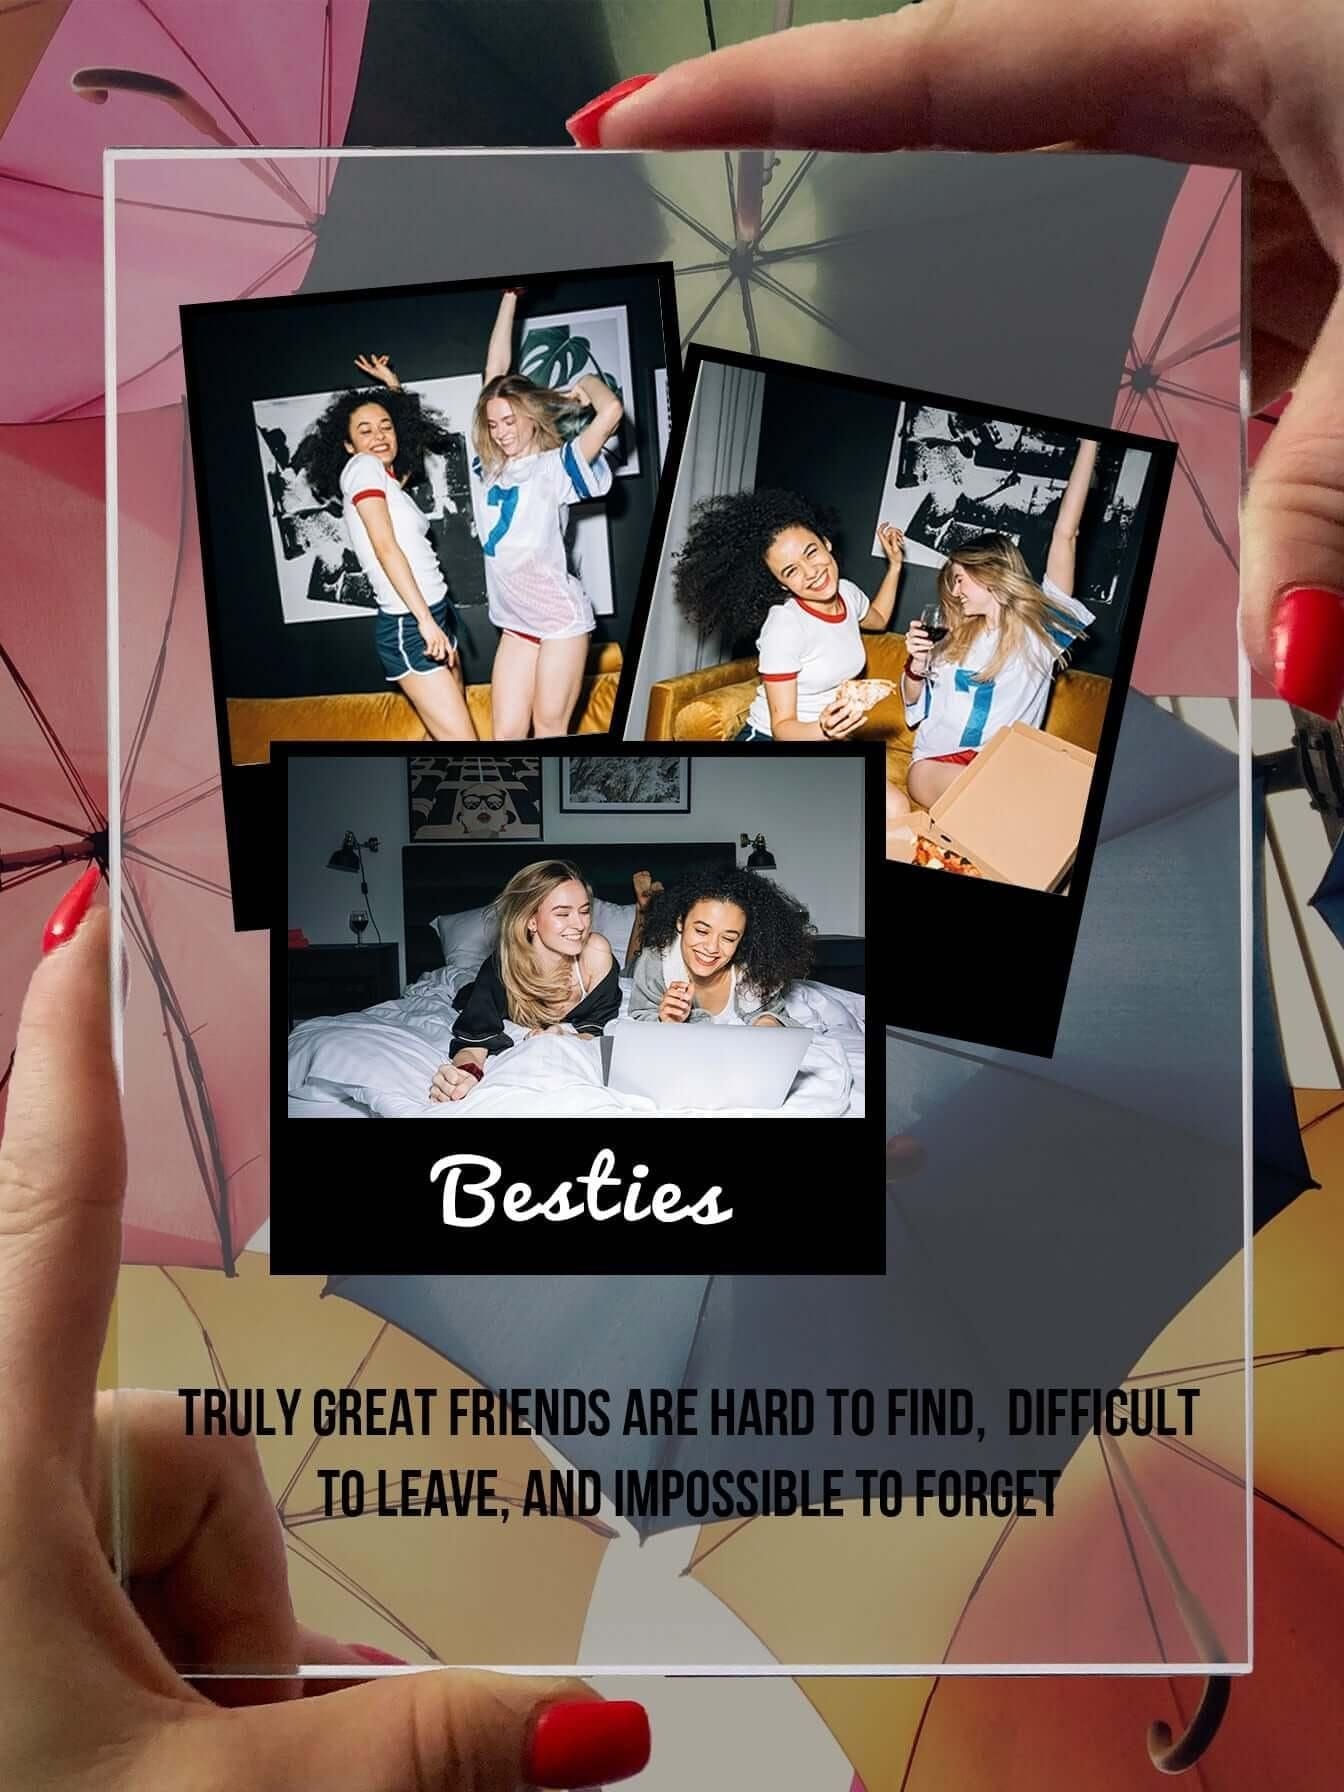 Personalised "Besties" glass poster-Personalised "Besties" template, high quality printed on the glass. These make the perfect gift. Order yours now 👉 sogifts.eu-black, friendship, glass poster, new, white-Personalized products-sogifts.eu